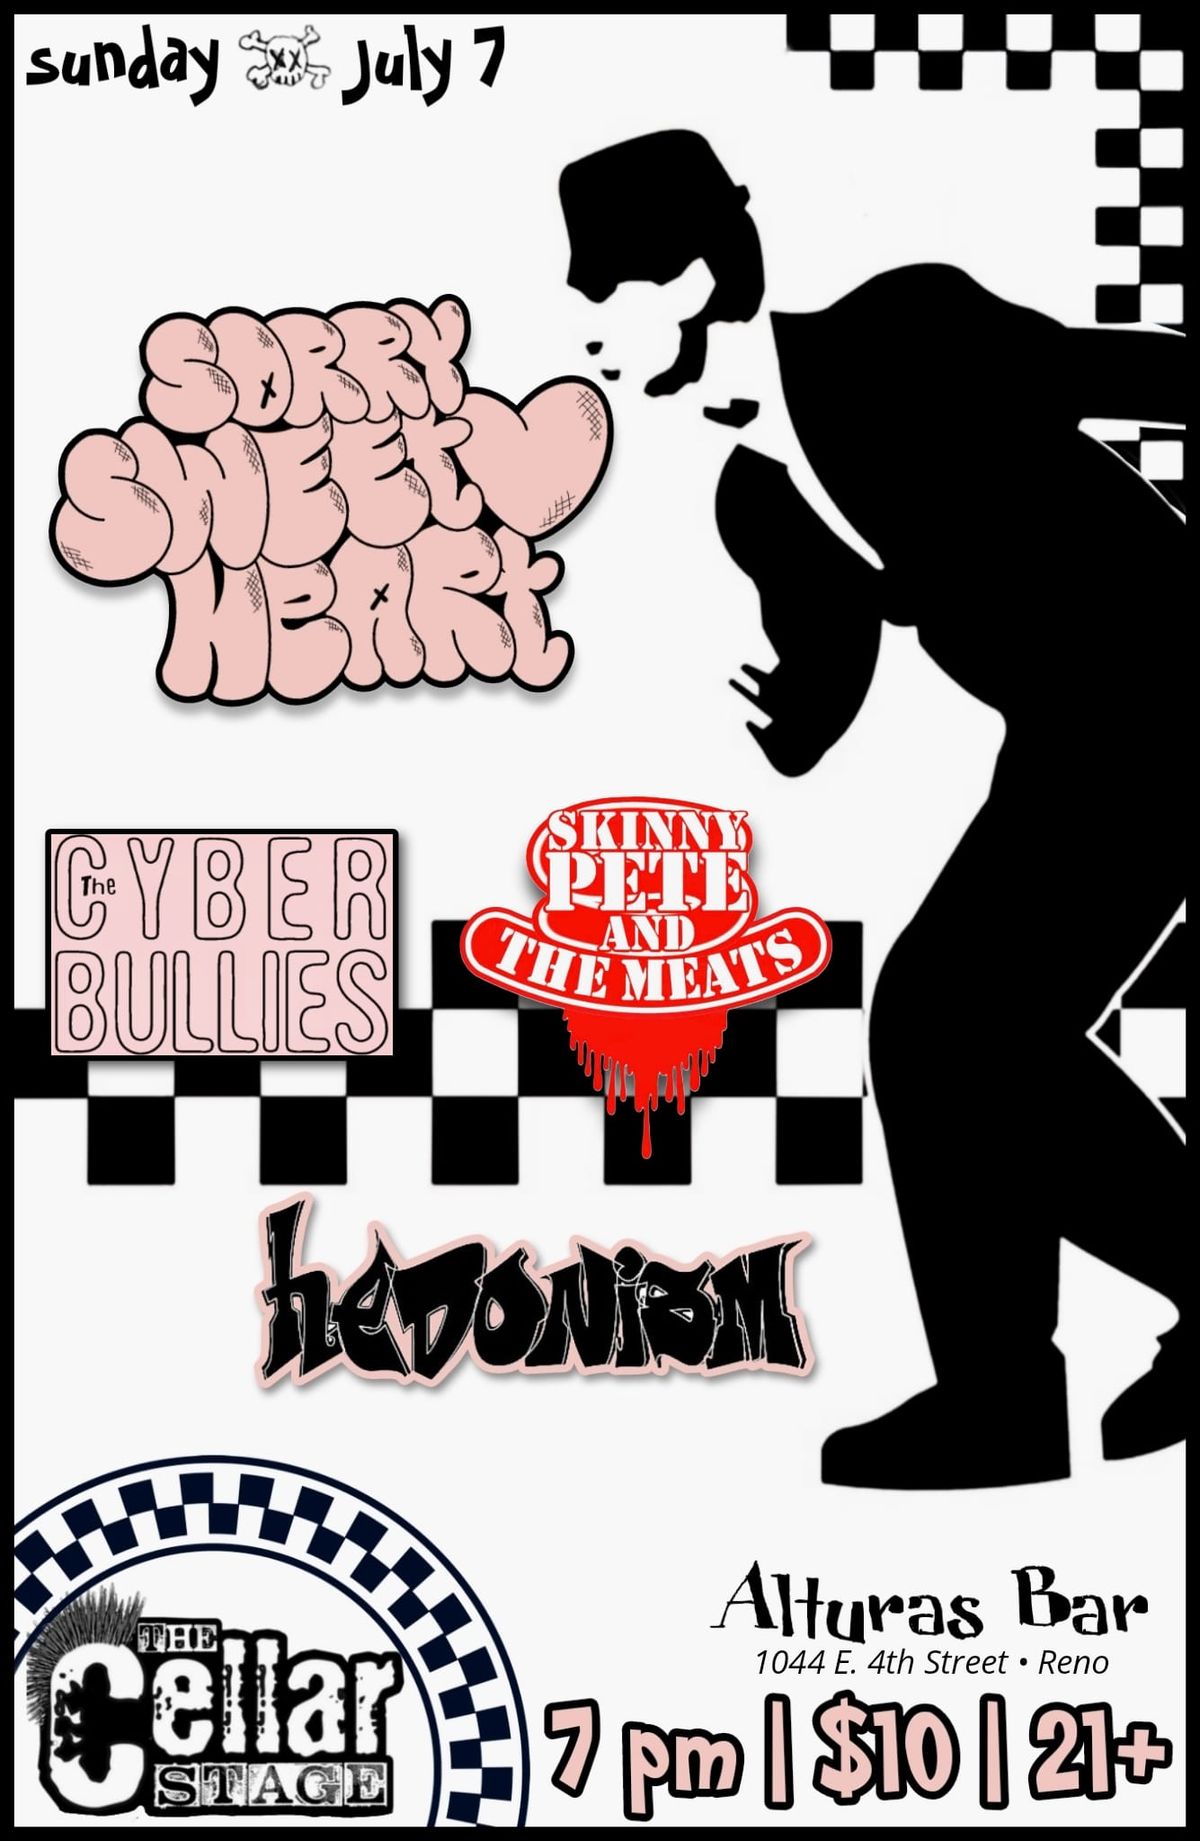 Sorry Sweetheart | The Cyber Bullies | Skinny Pete & The Meats | Hedonism 